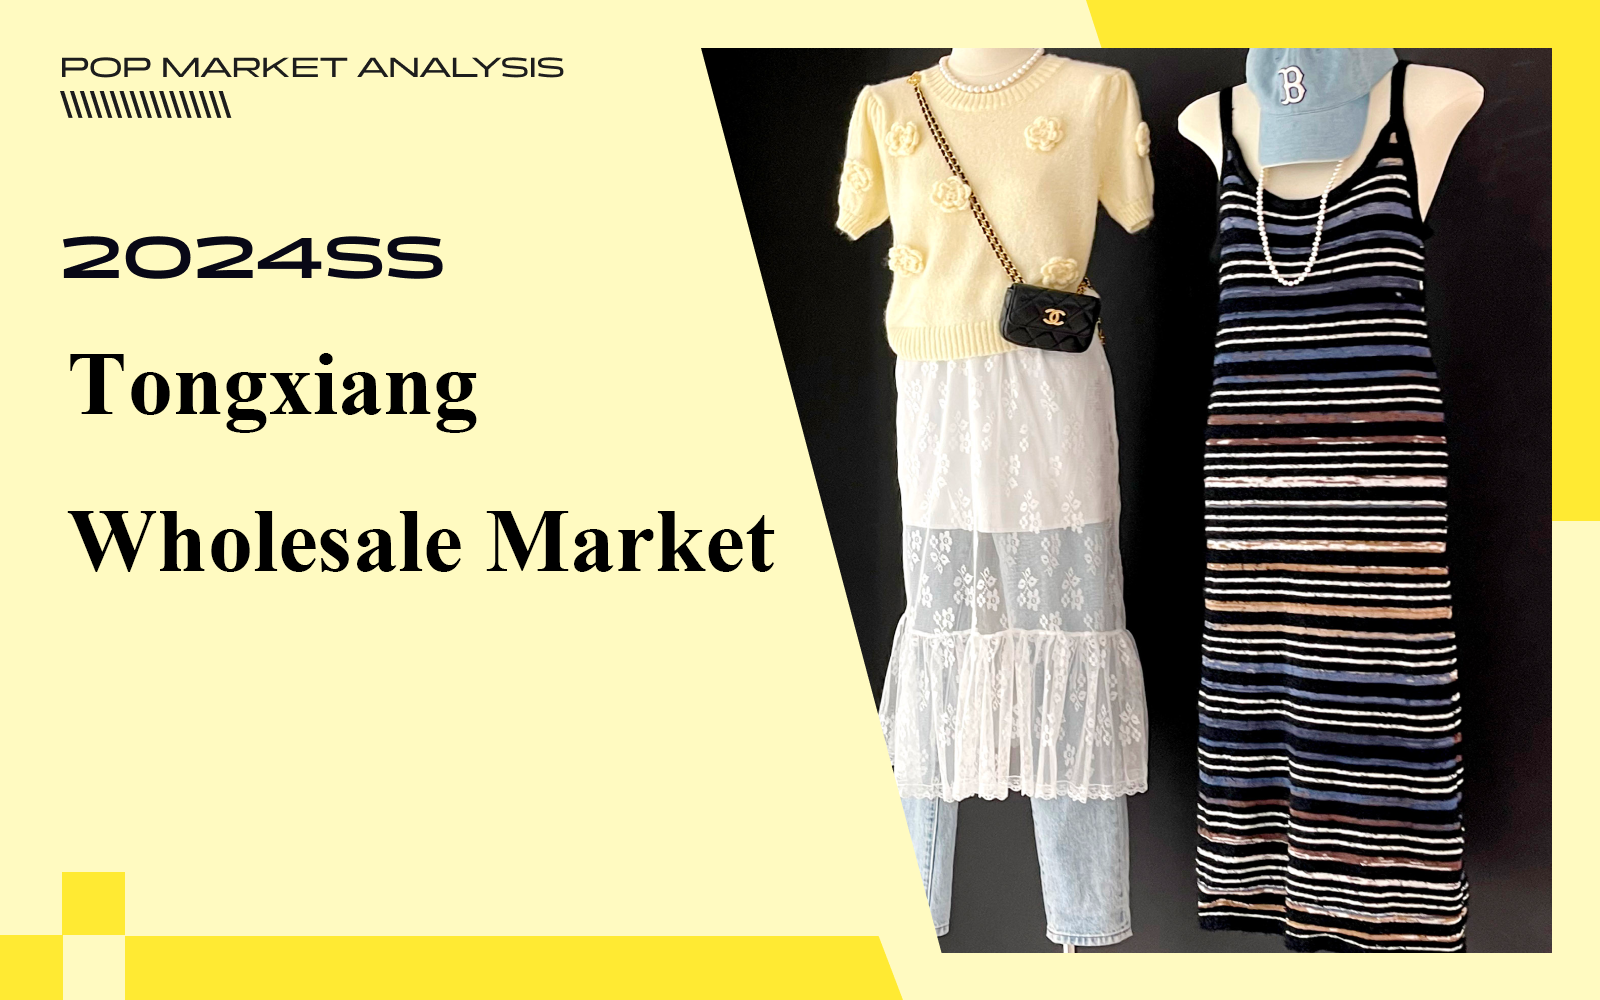 Women's Knitwear -- The Analysis of Tongxiang Wholesale Market